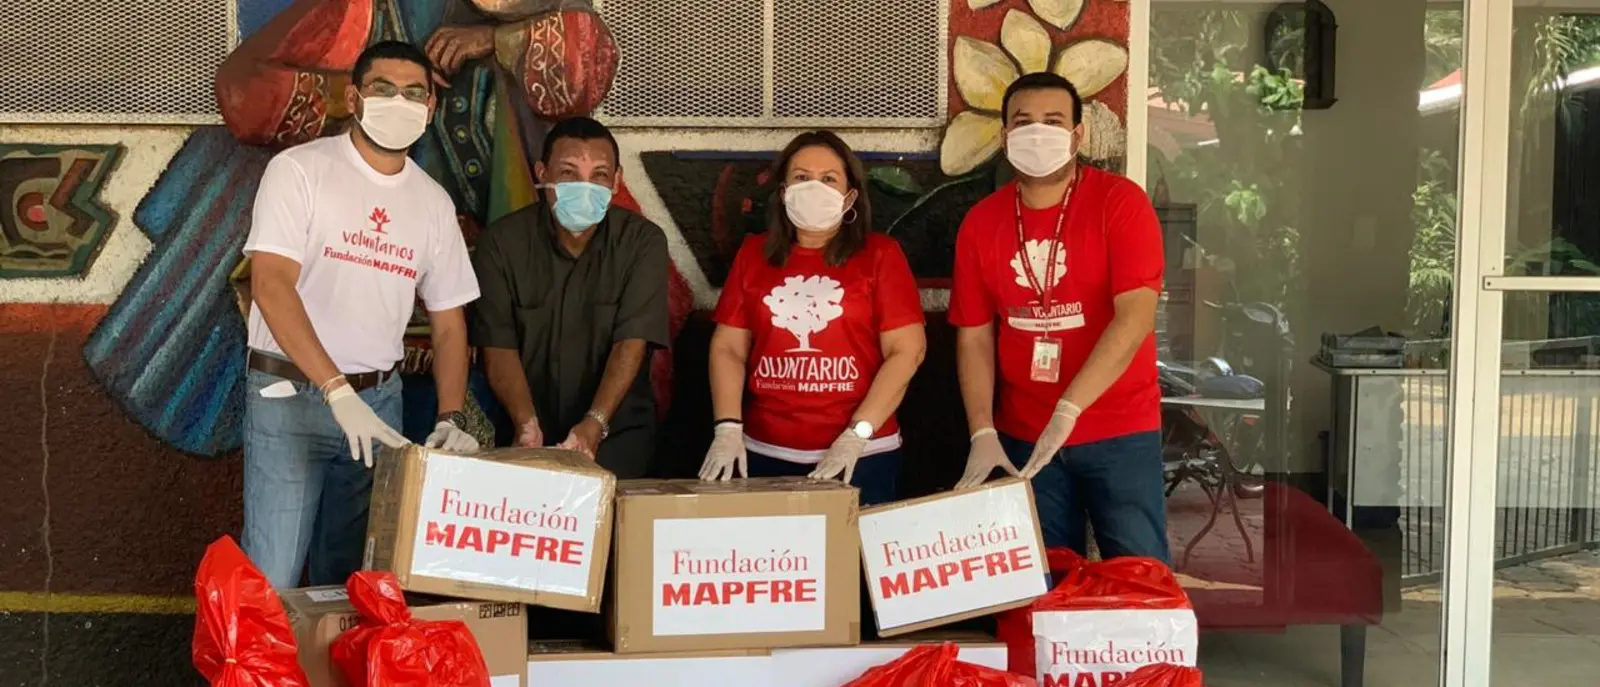 Fundación MAPFRE allocates 345,000 euros for healthcare equipment and food supplements in Nicaraguan nursing homes